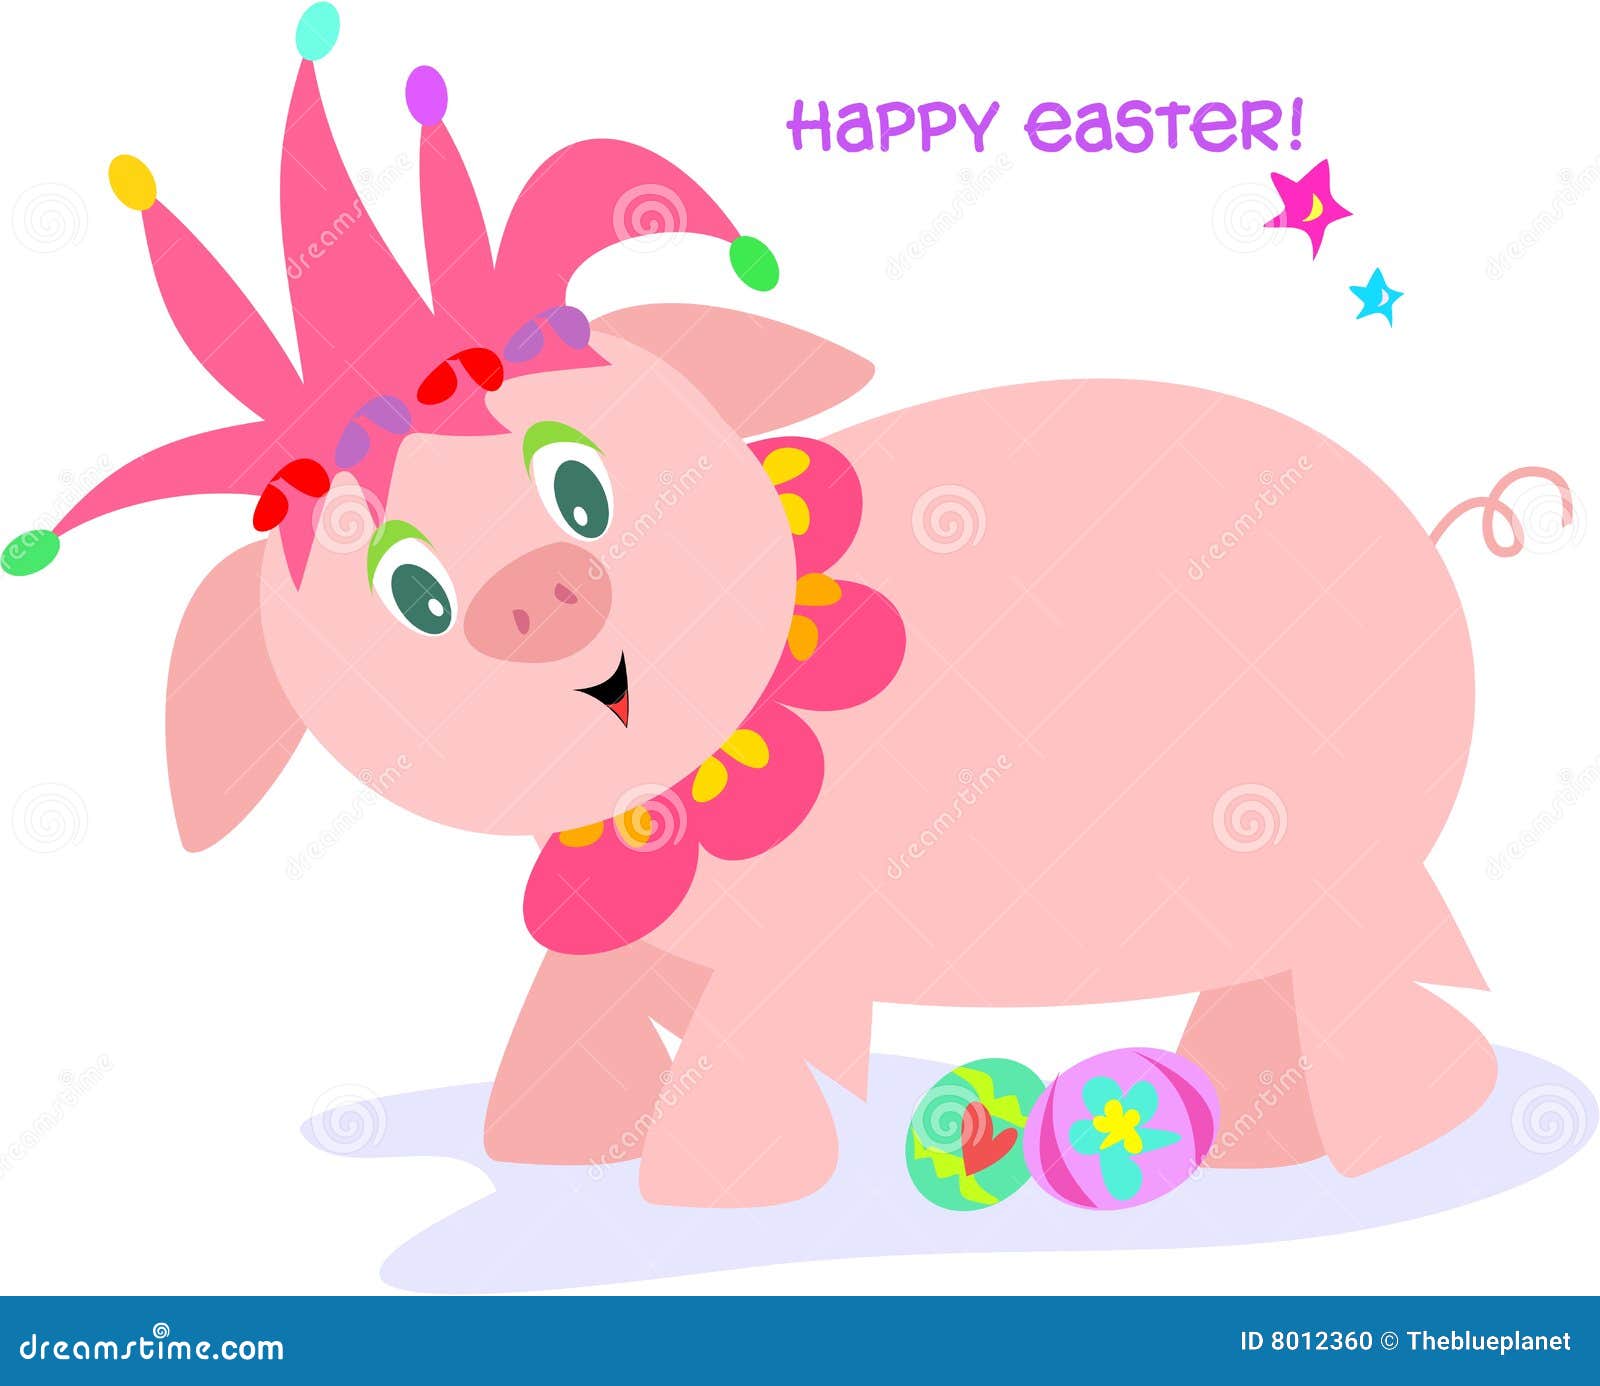 clipart easter pig - photo #4